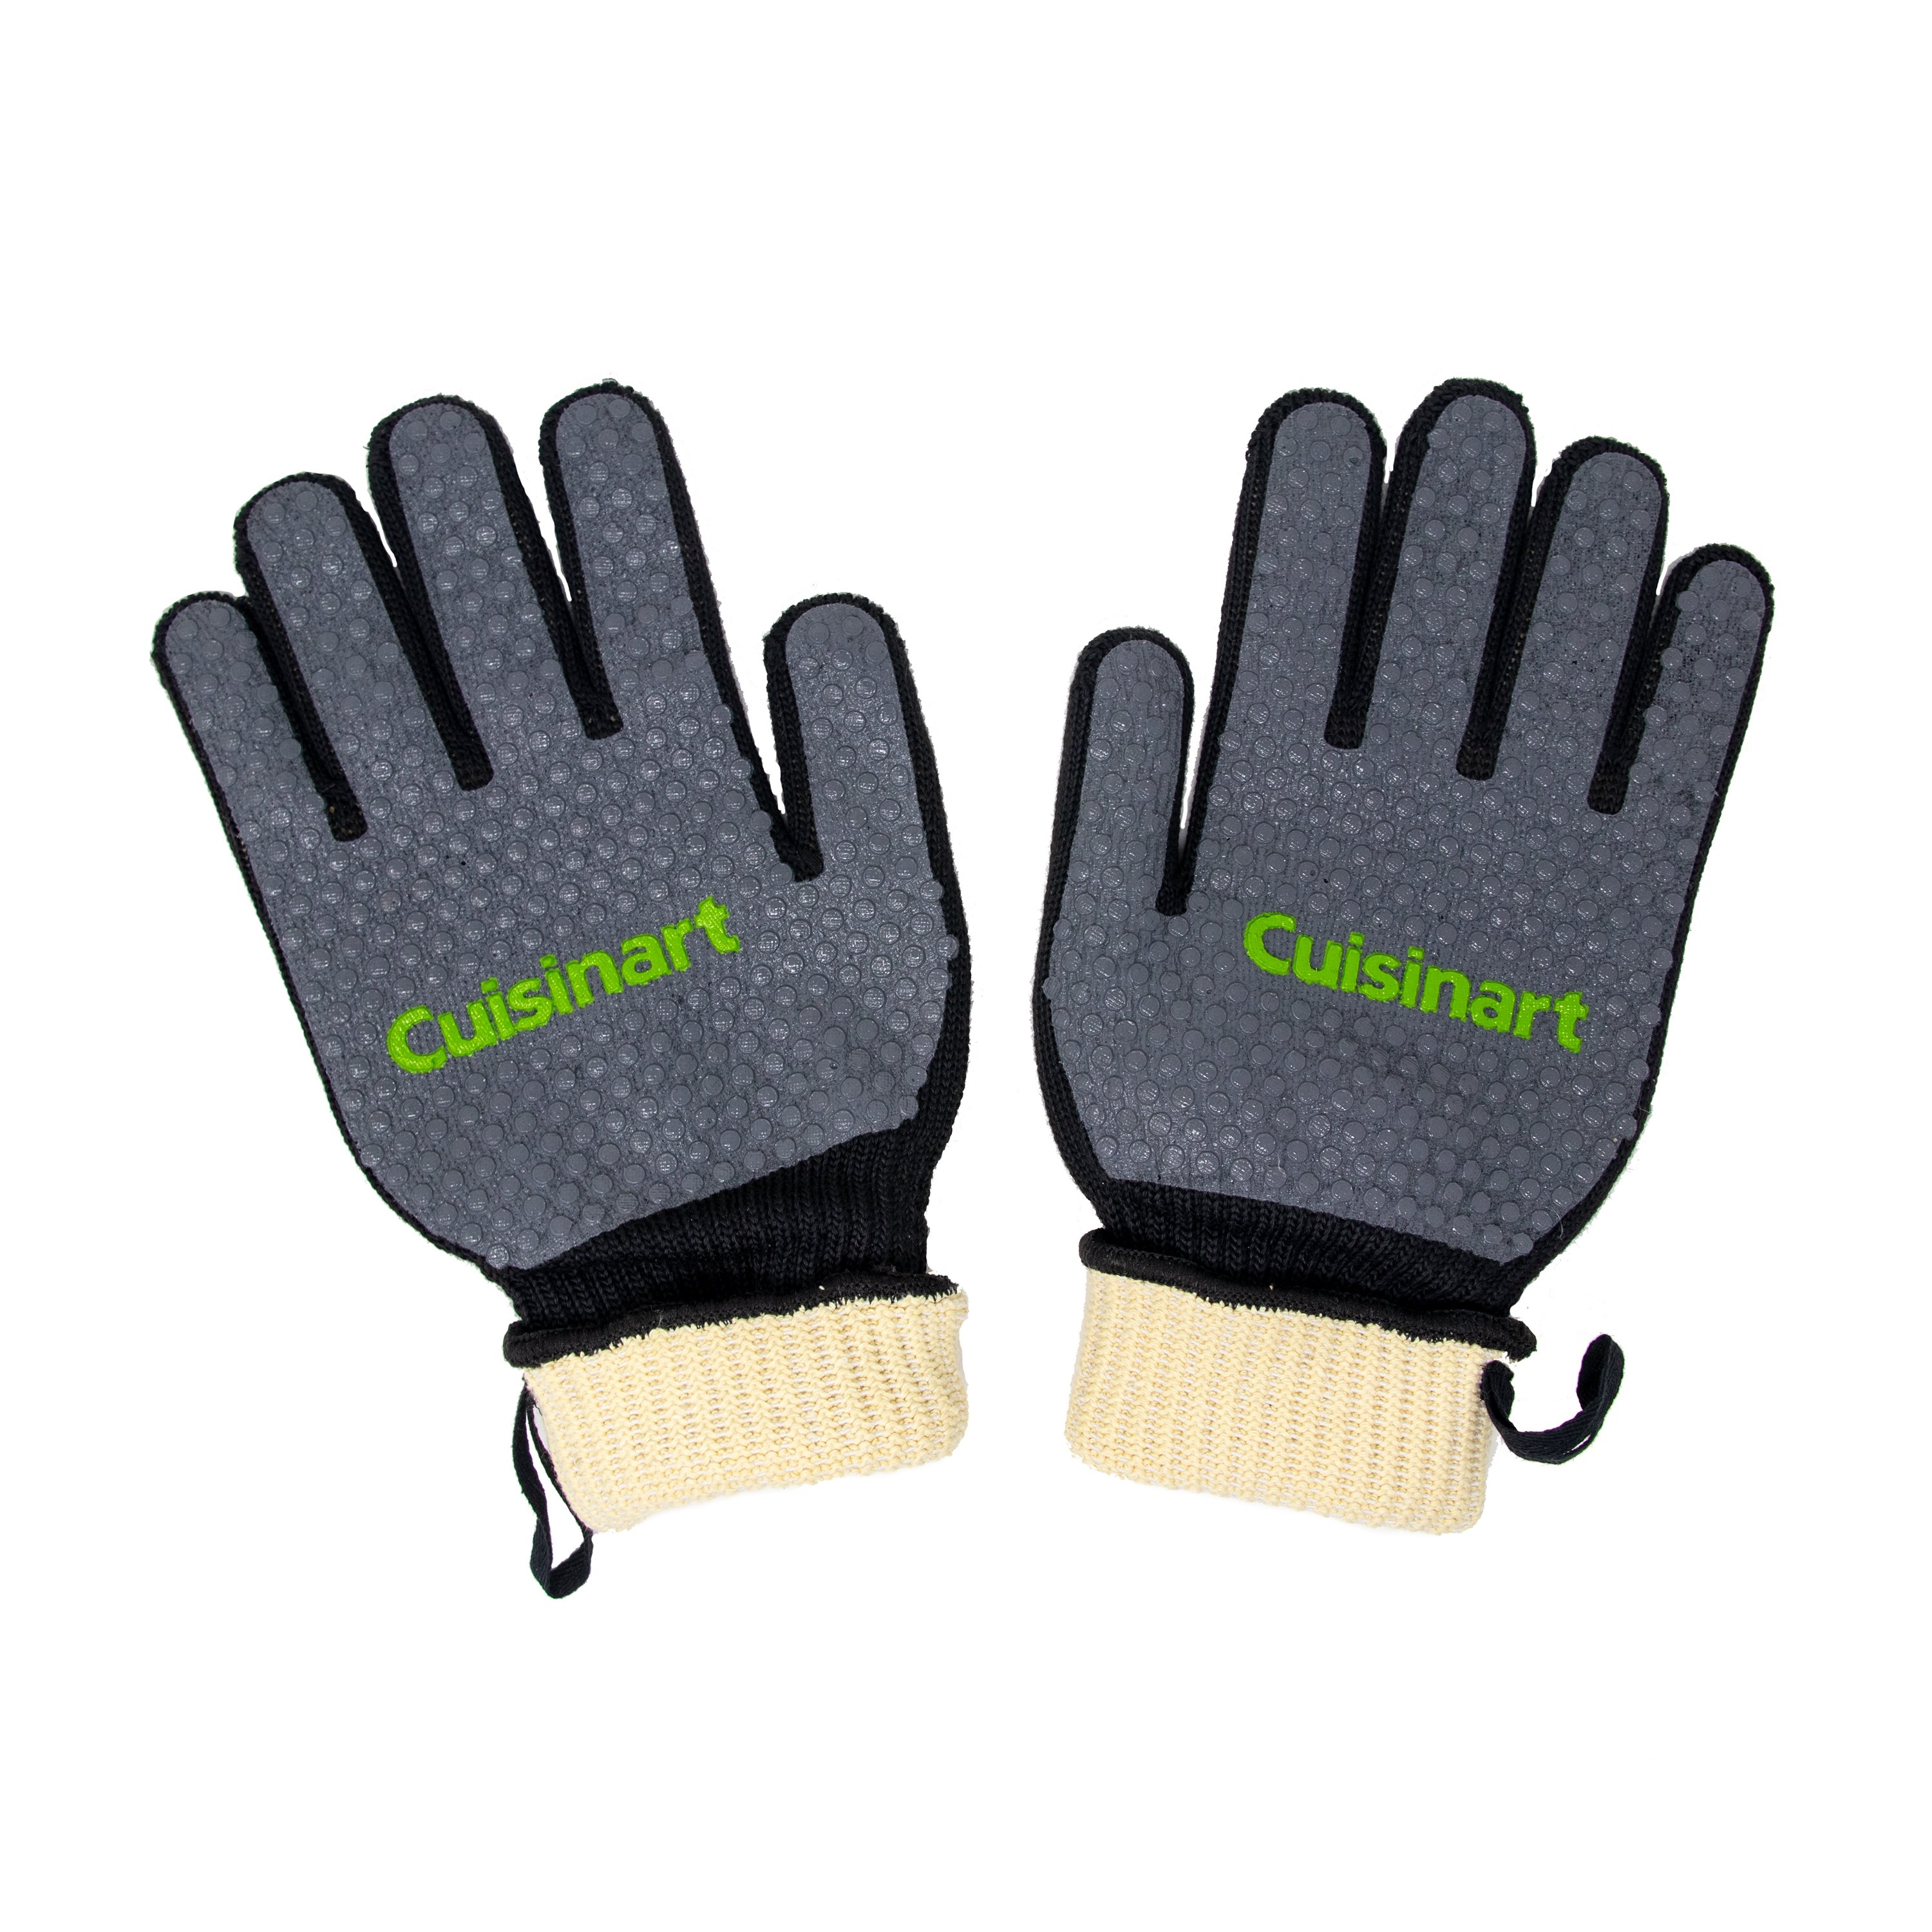 Full Coverage Heat Resistant Grill Gloves